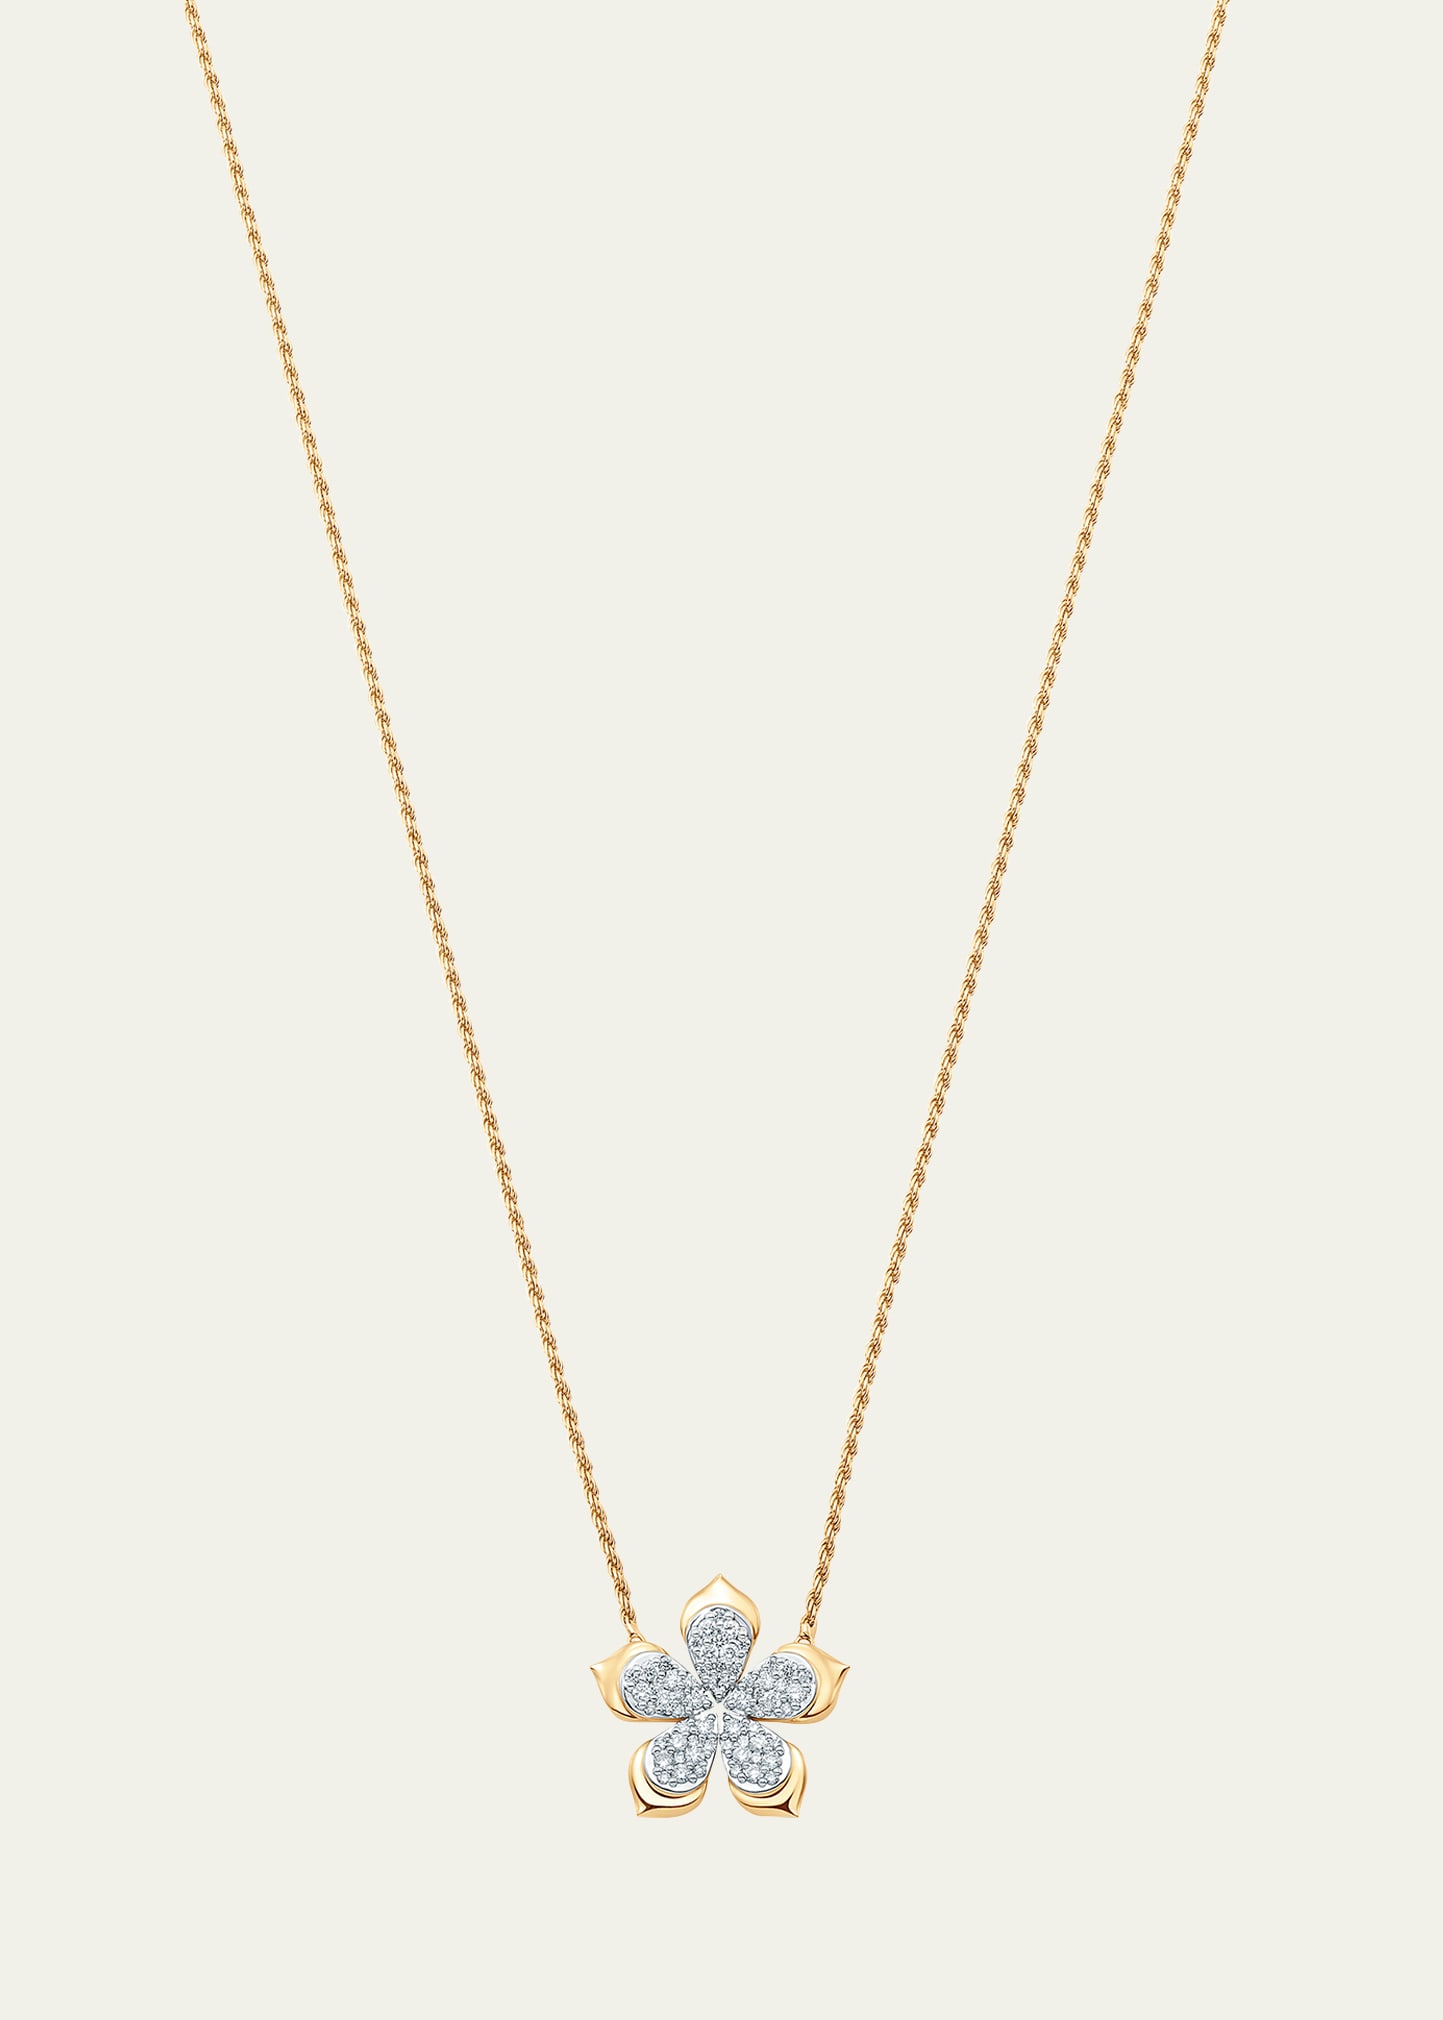 18K Two-Tone Gold Lierre Pear Diamond Flower Station Necklace